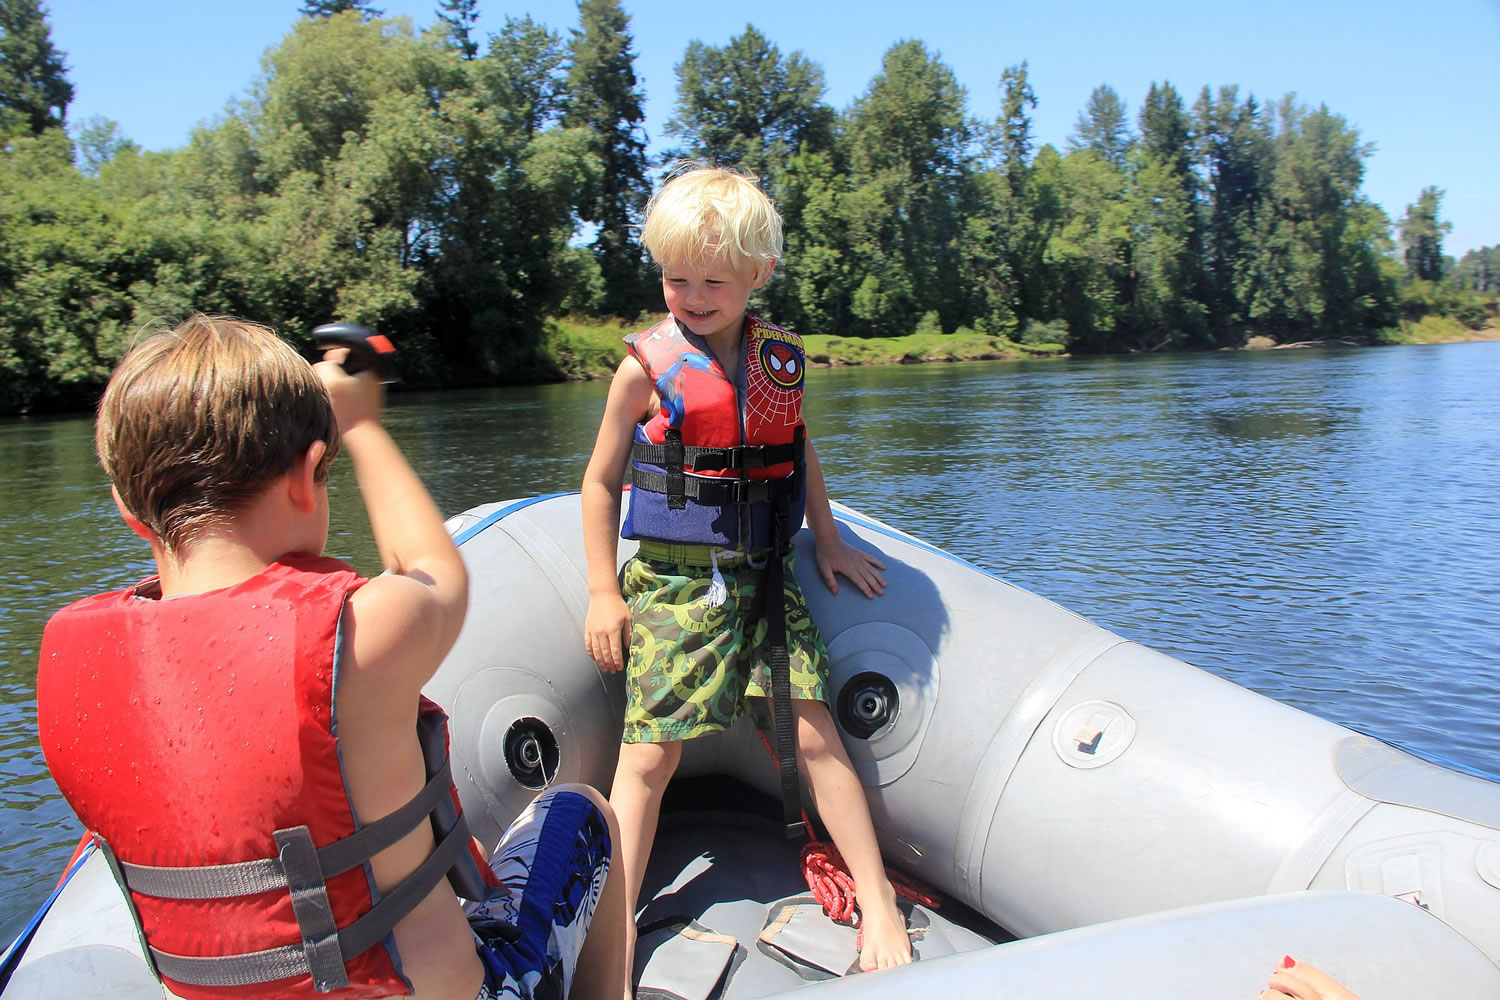 Rylan, 9, and Noah Peters, 6, raft from Spring Valley to Grand Island on the Willamette River near Salem, Ore., in July 2014. The smooth stream with easy vehicle access is a great place for kids to learn to paddle.